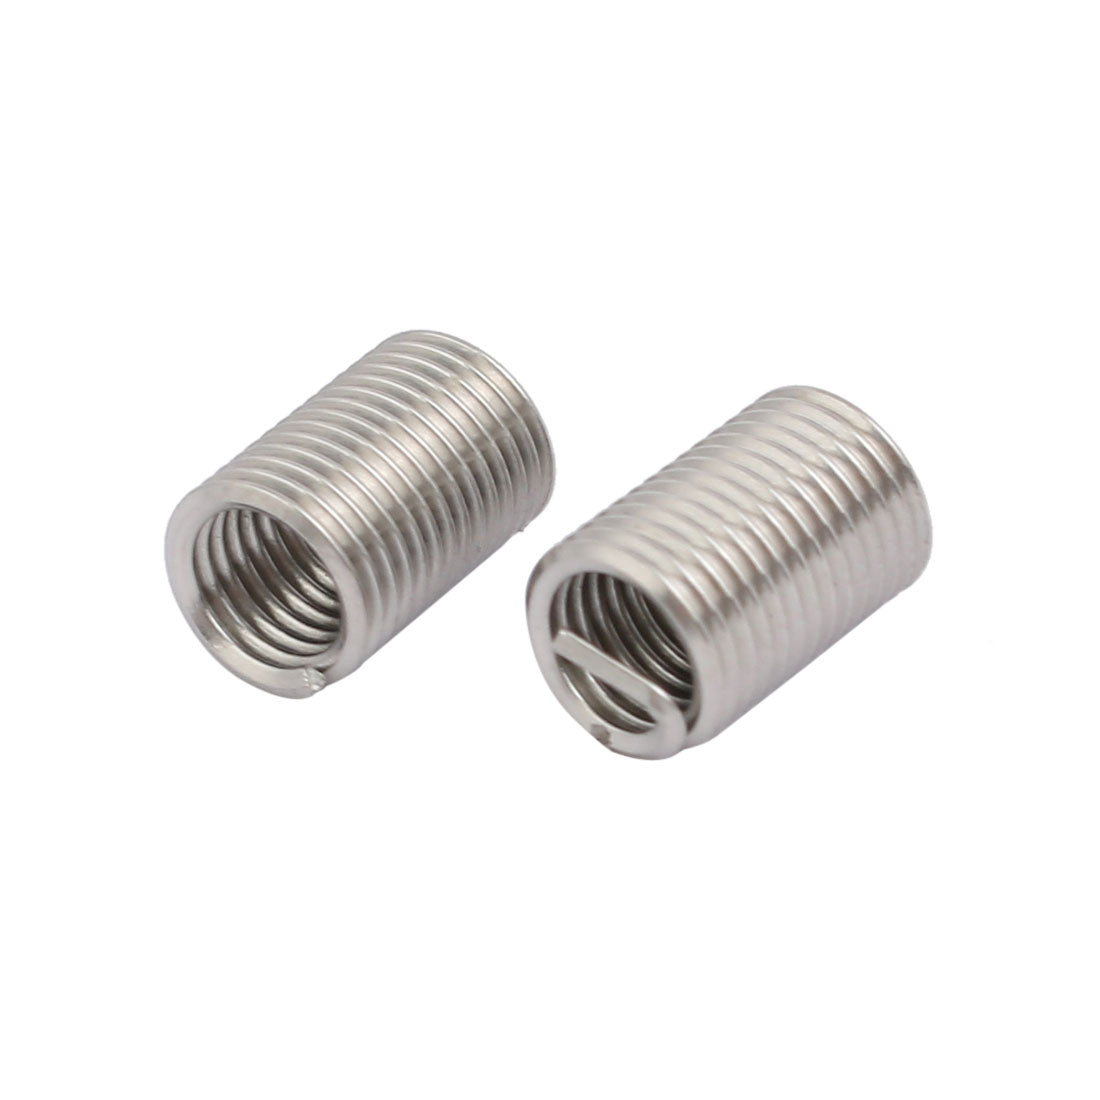 uxcell Uxcell #10-32x0.57" 304 Stainless Steel Helical Coil Wire Thread Insert 12pcs